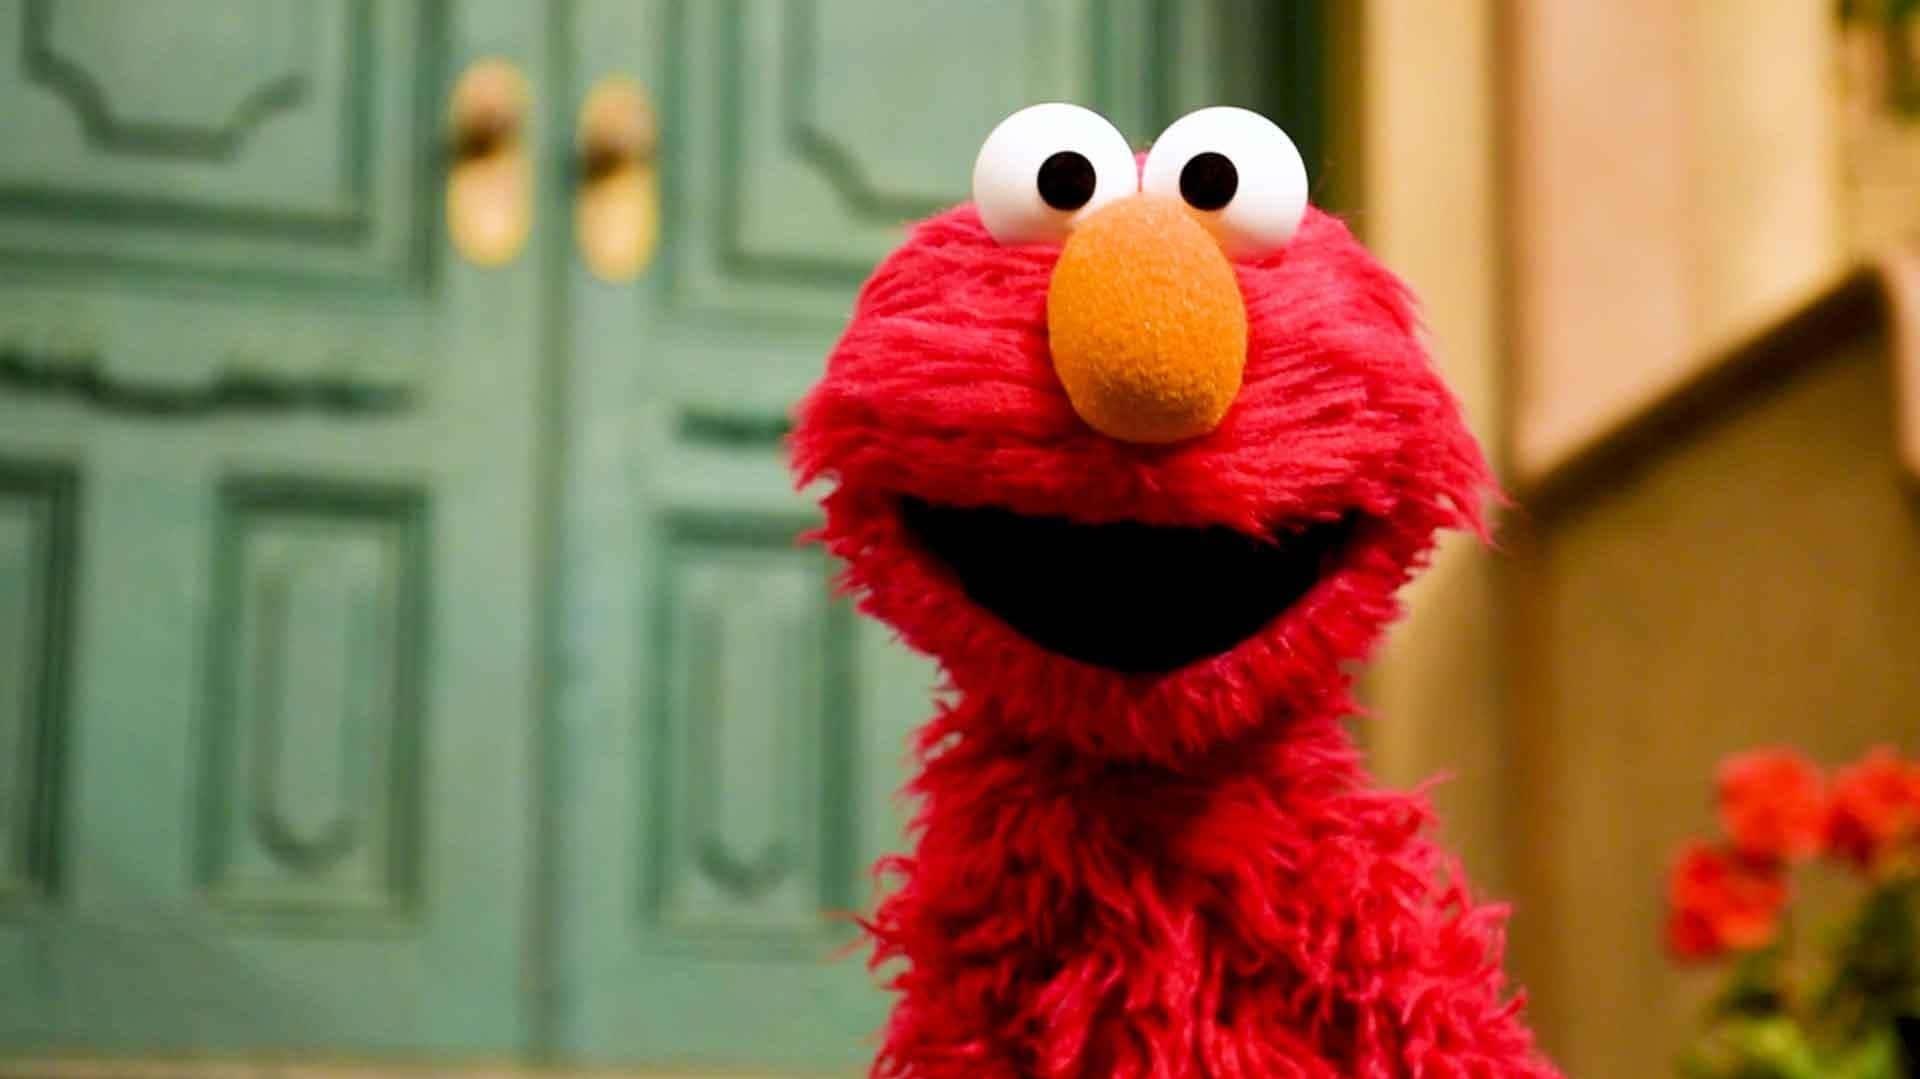 Elmo HD Wallpapers 1000 Free Elmo Wallpaper Images For All Devices